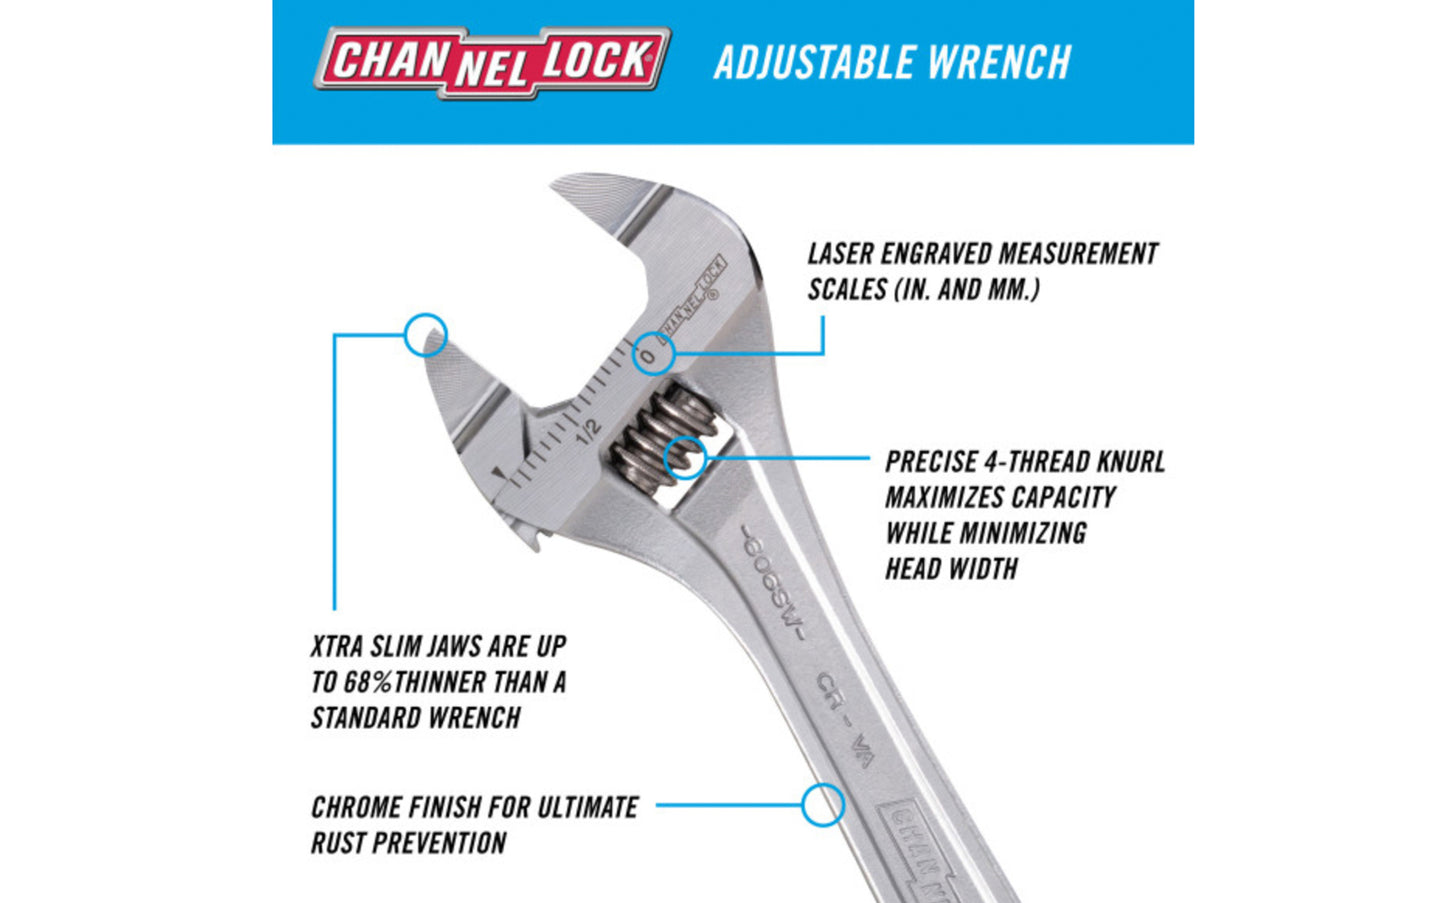 Channellock 6" Xtra Slim Jaw Adjustable Wrench features slimmer jaws. Measurement scales are laser engraved (in. on front, mm. on reverse) & are handy for sizing nuts, pipe & tube diameters. Rugged Chrome Vanadium steel. Chrome finish for rust prevention. 6.38" size. Extra Slim Wrench Channelock Model 806s.